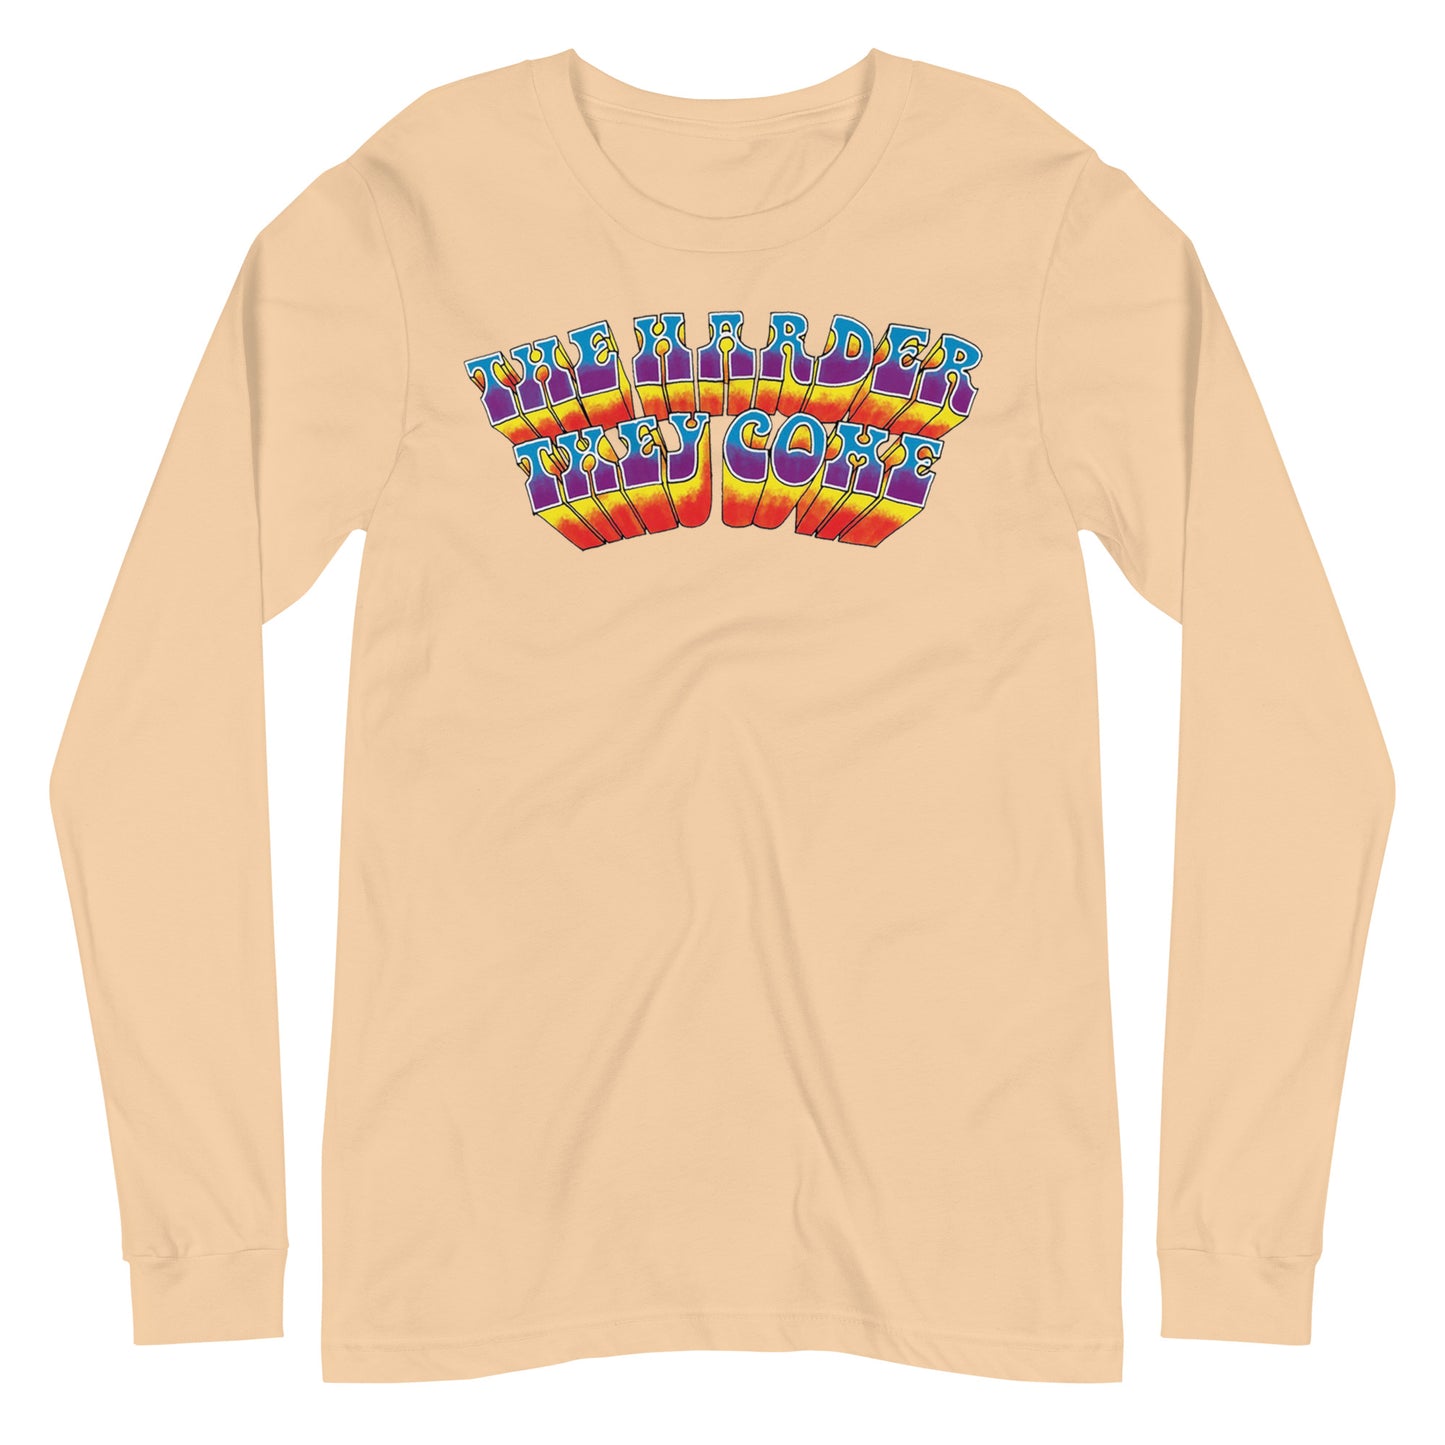 The Harder They Come 1972 Logo Unisex Long-Sleeve T-Shirt in Multiple Colors